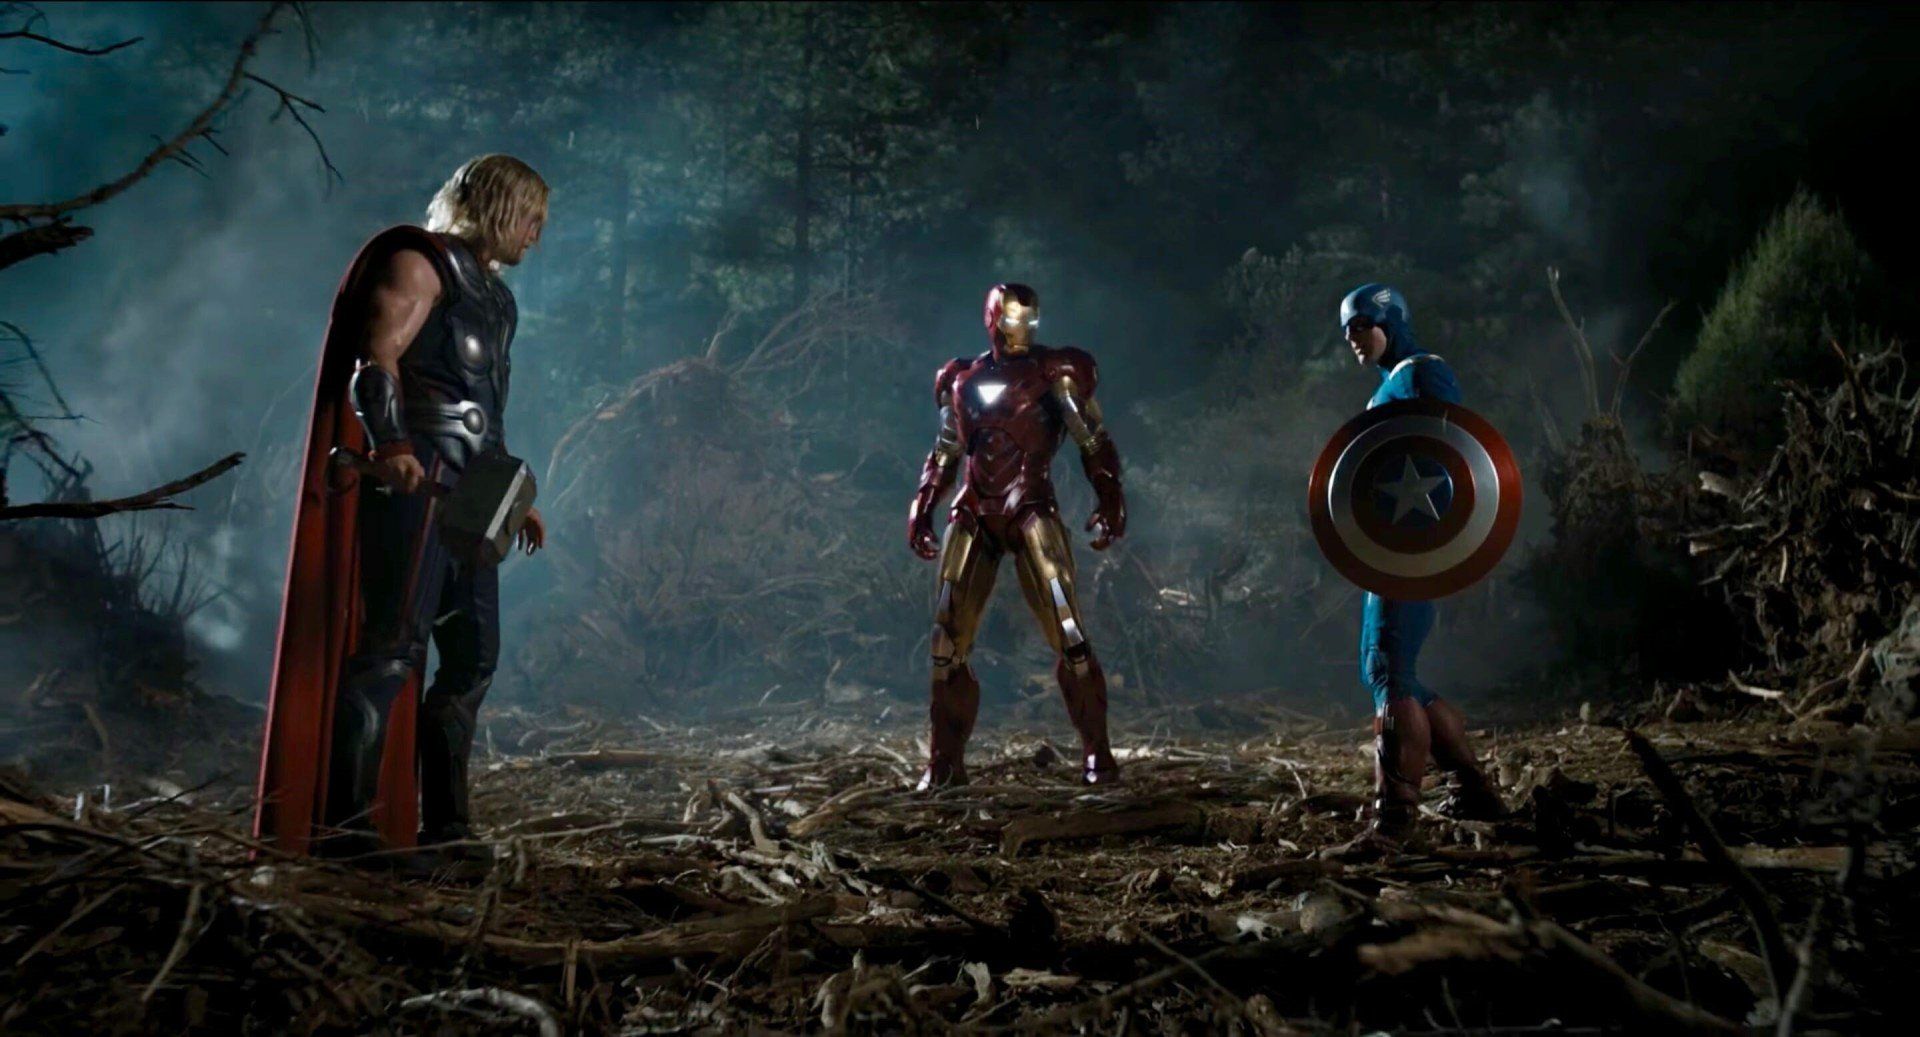 thor, iron man, and captain america facing off in a forest